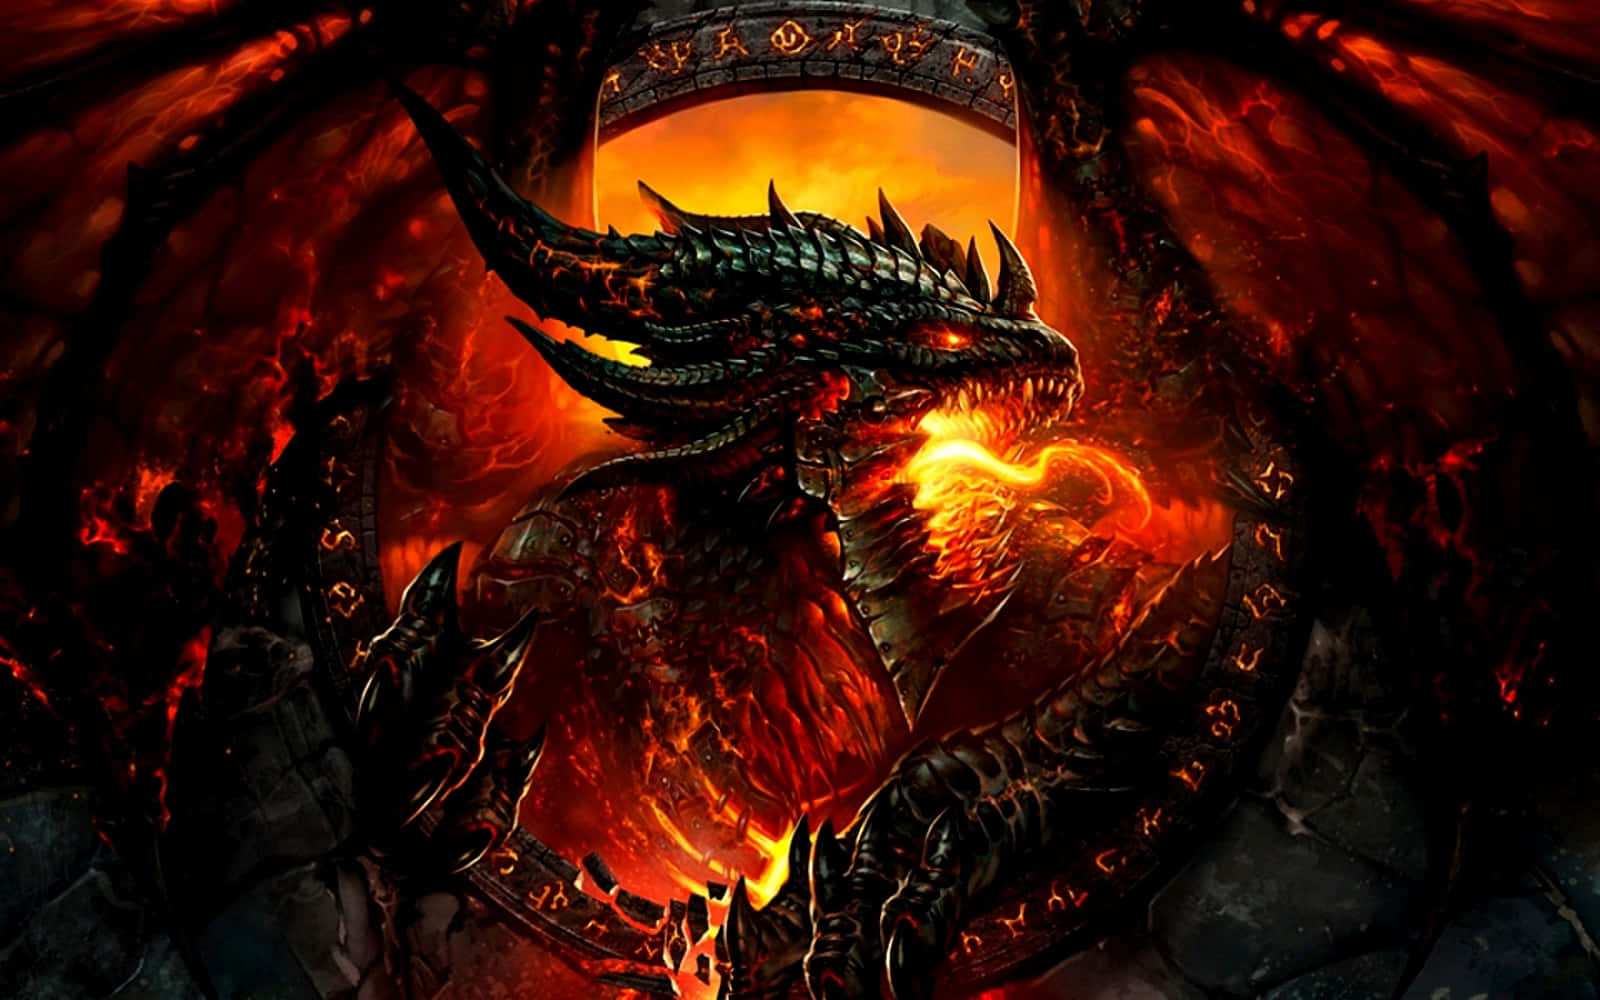 Super Cool Dragon Blowing Fire Background